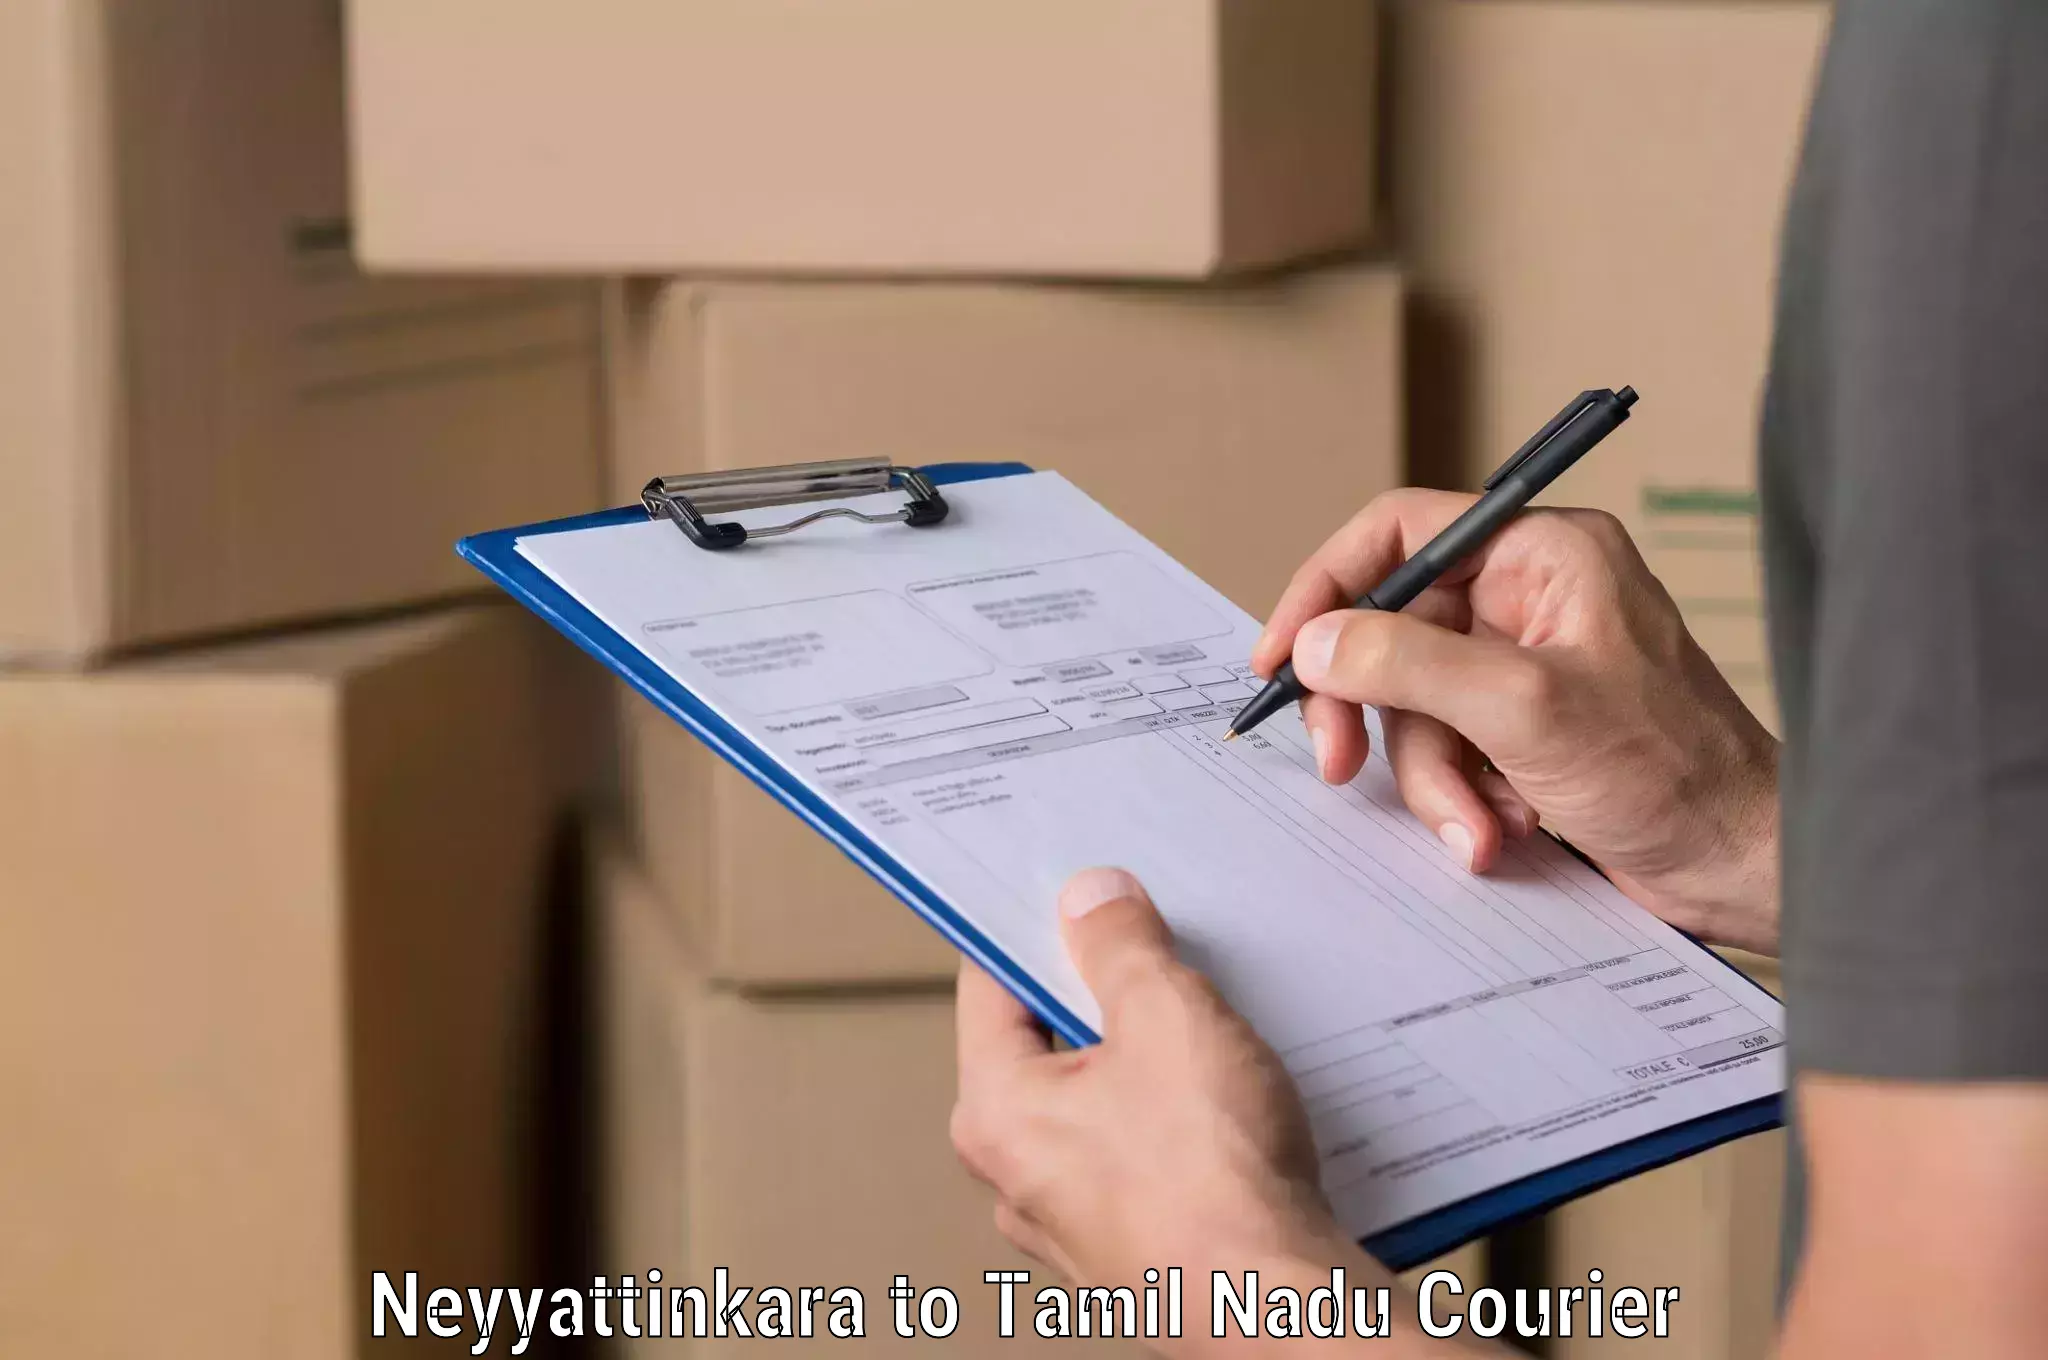 Sustainable delivery practices Neyyattinkara to Tiruppur